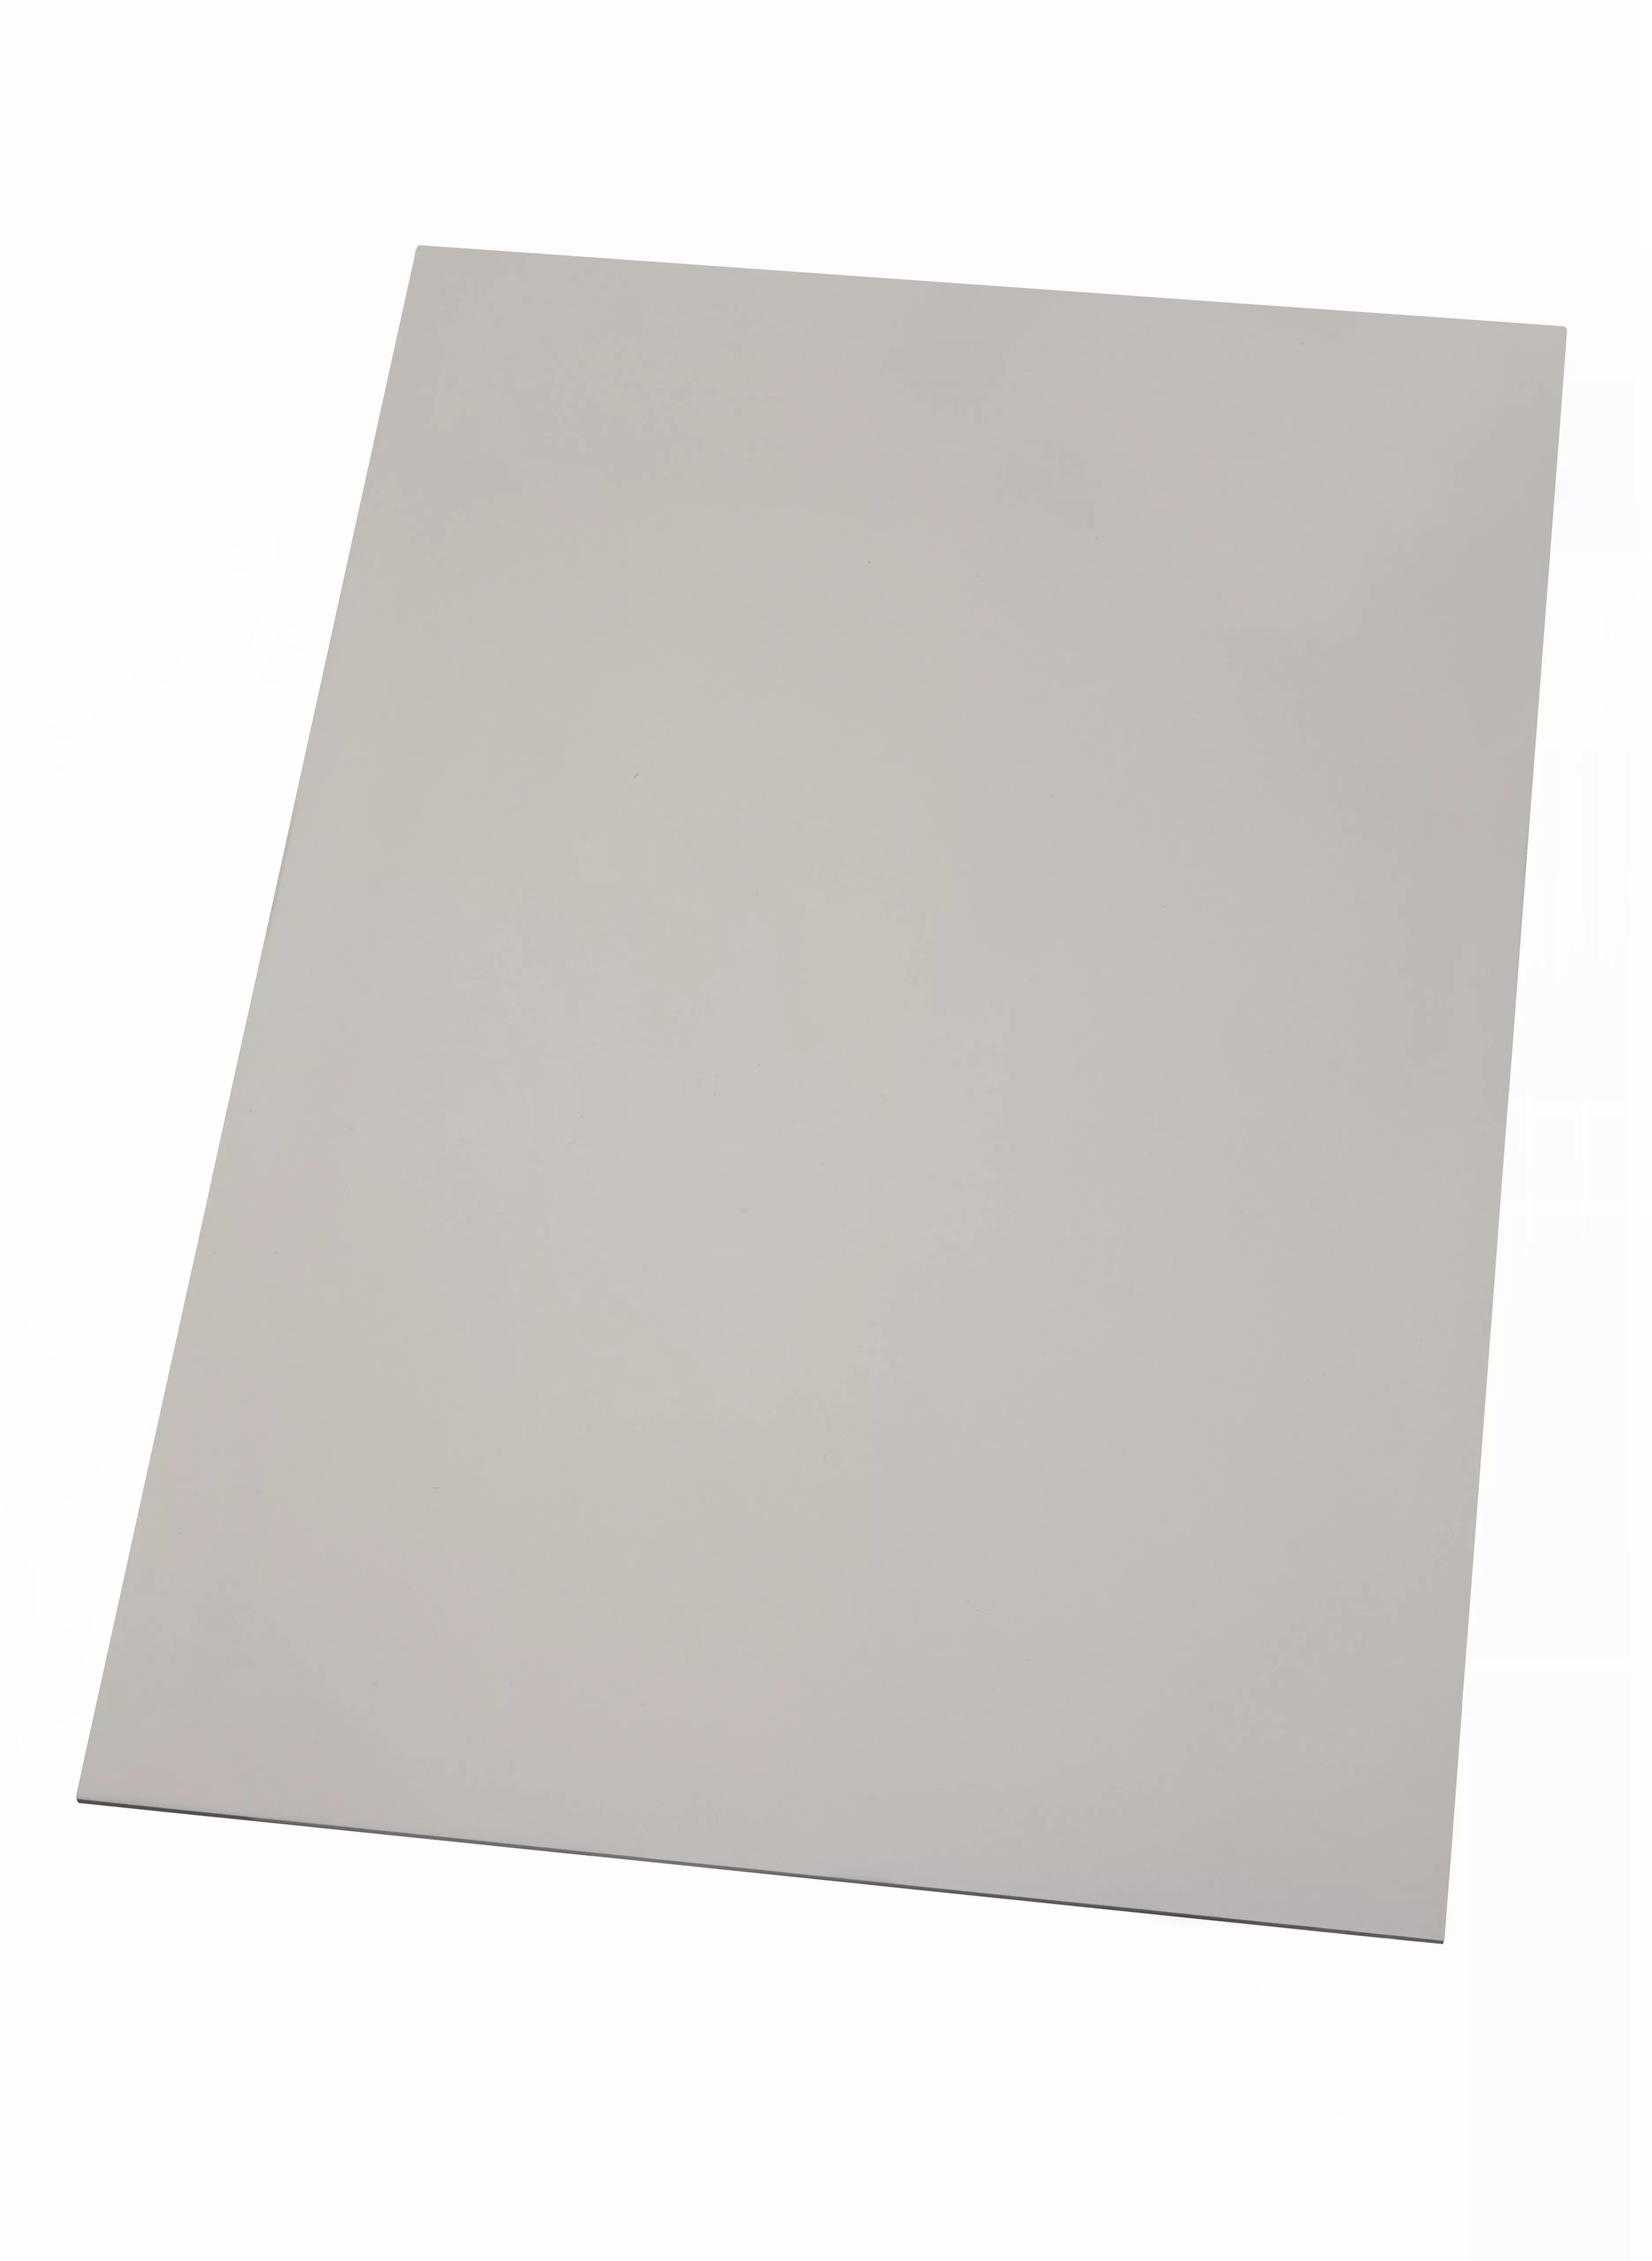 3M™ Thermally Conductive Acrylic Interface Pad 5571-10, 300mm x 20m,
1/Case